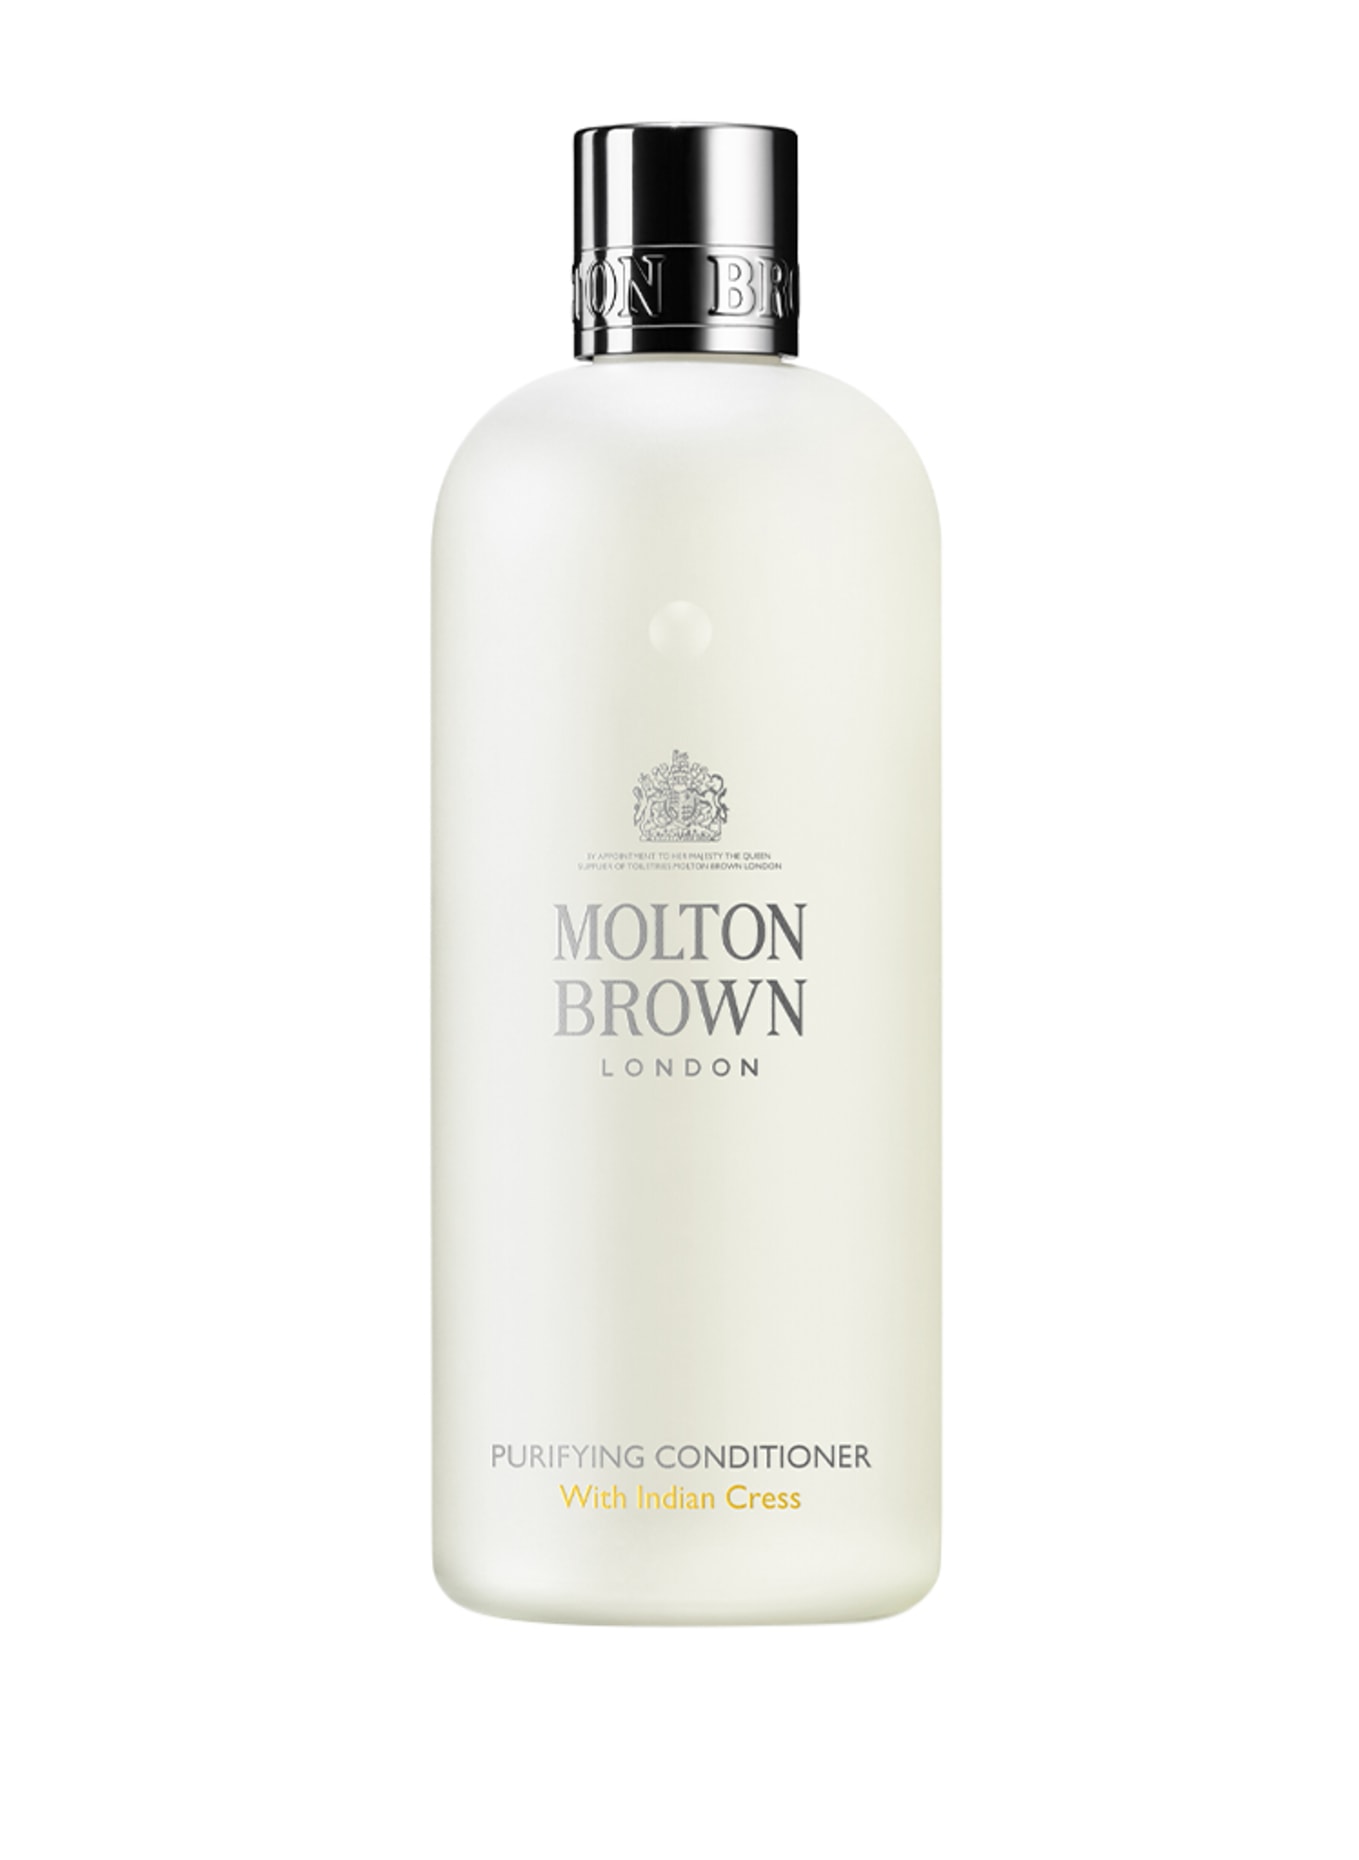 MOLTON BROWN PURIFYING CONDITIONER WITH INDIAN CRESS (Bild 1)